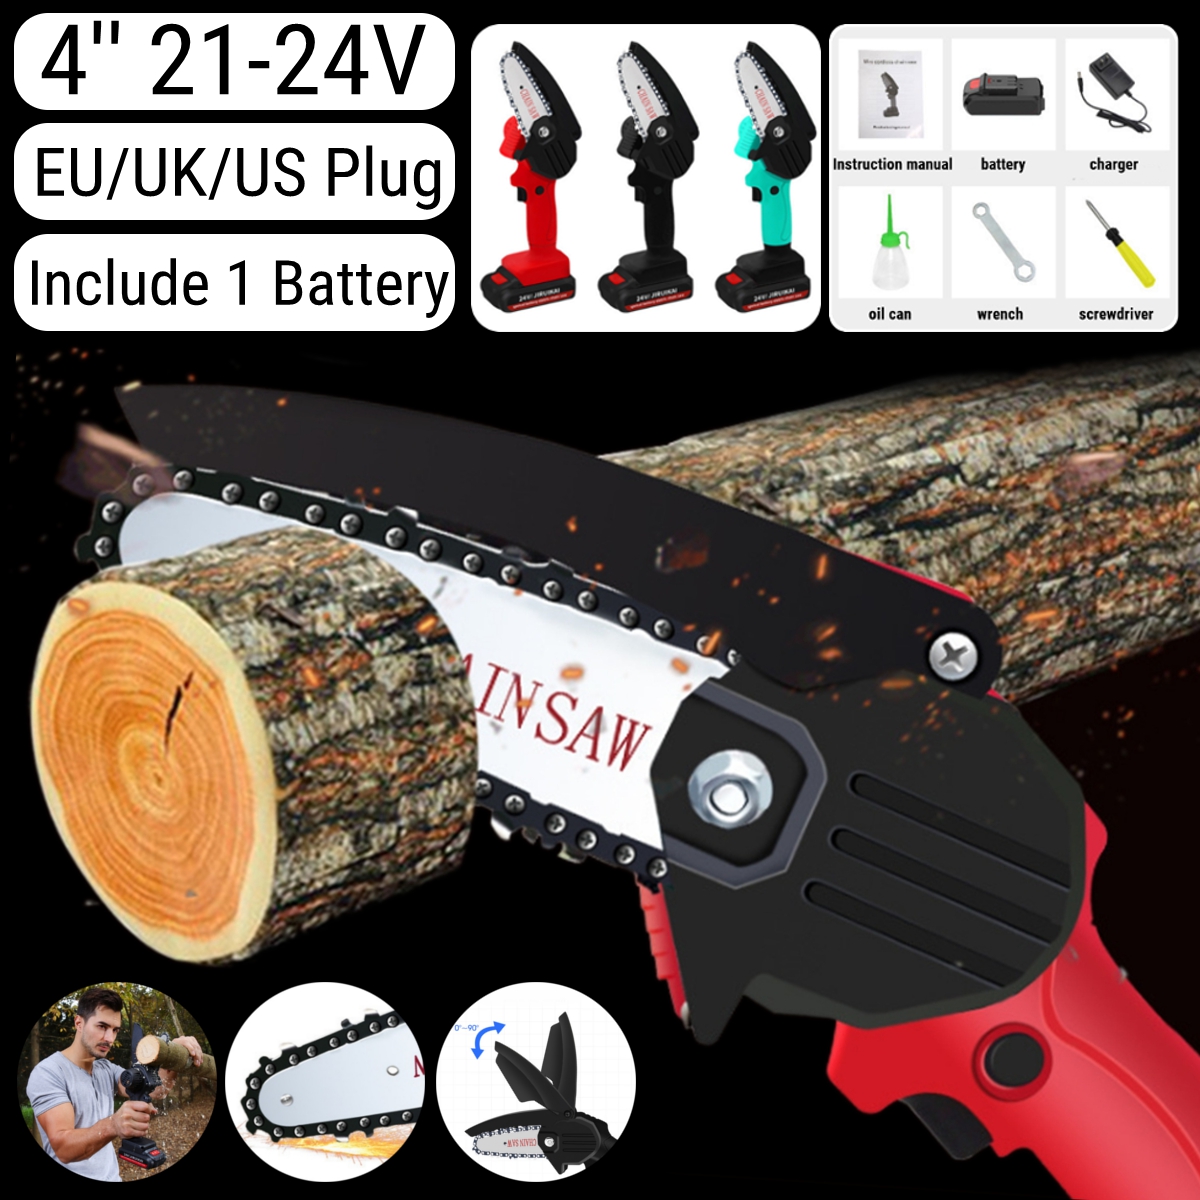 4-Inch-Electric-Chain-Saw-Chainsaw-Wood-Cutter-Garden-Tool-W-1pc-Battery-21-24V-1770555-2